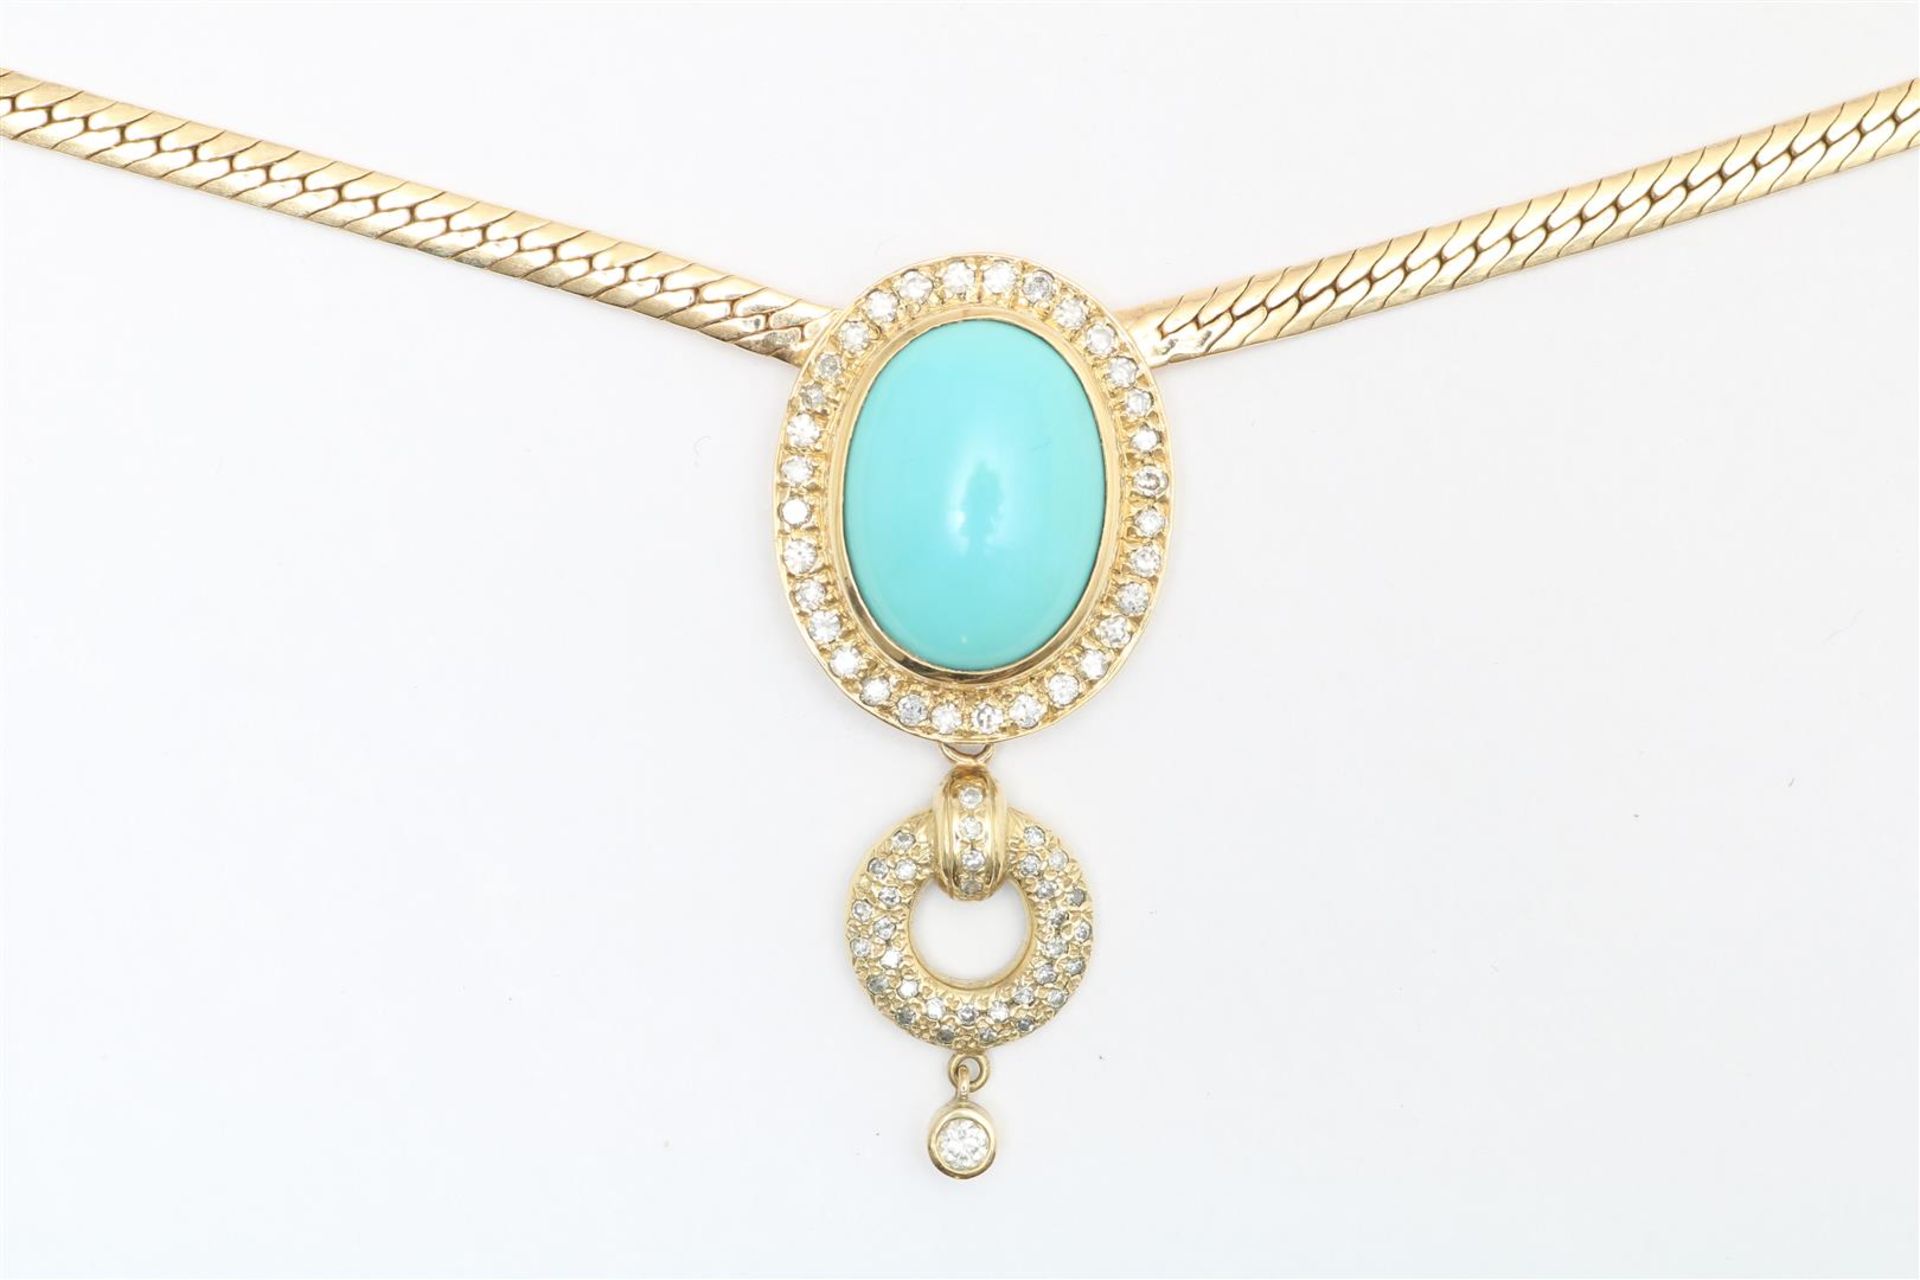 Gold necklace with a pendant set with turquoise and diamonds, approx. 0.45 ct. (measured set), alloy